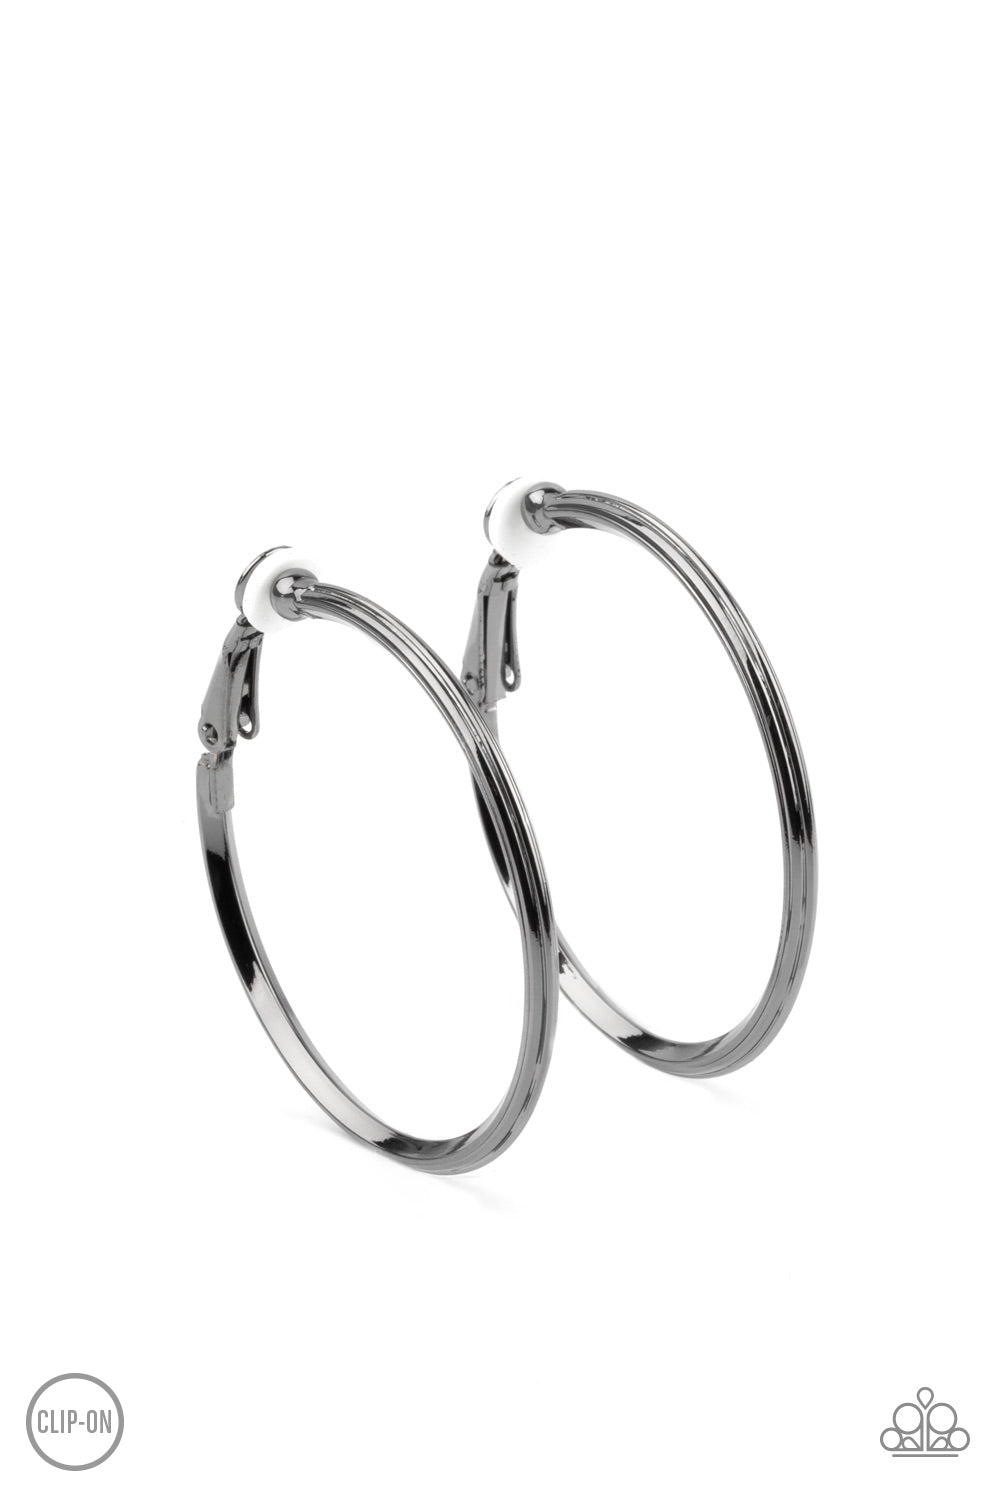 City Classic Black Clip-On Hoop Earring - Paparazzi Accessories  Etched in fine lines, a beveled gunmetal hoop curls around the ear for a classic look. Hoop measures approximately 1 1/2" in diameter. Earring attaches to a standard clip-on fitting.  All Paparazzi Accessories are lead free and nickel free!  Sold as one pair of clip-on earrings.